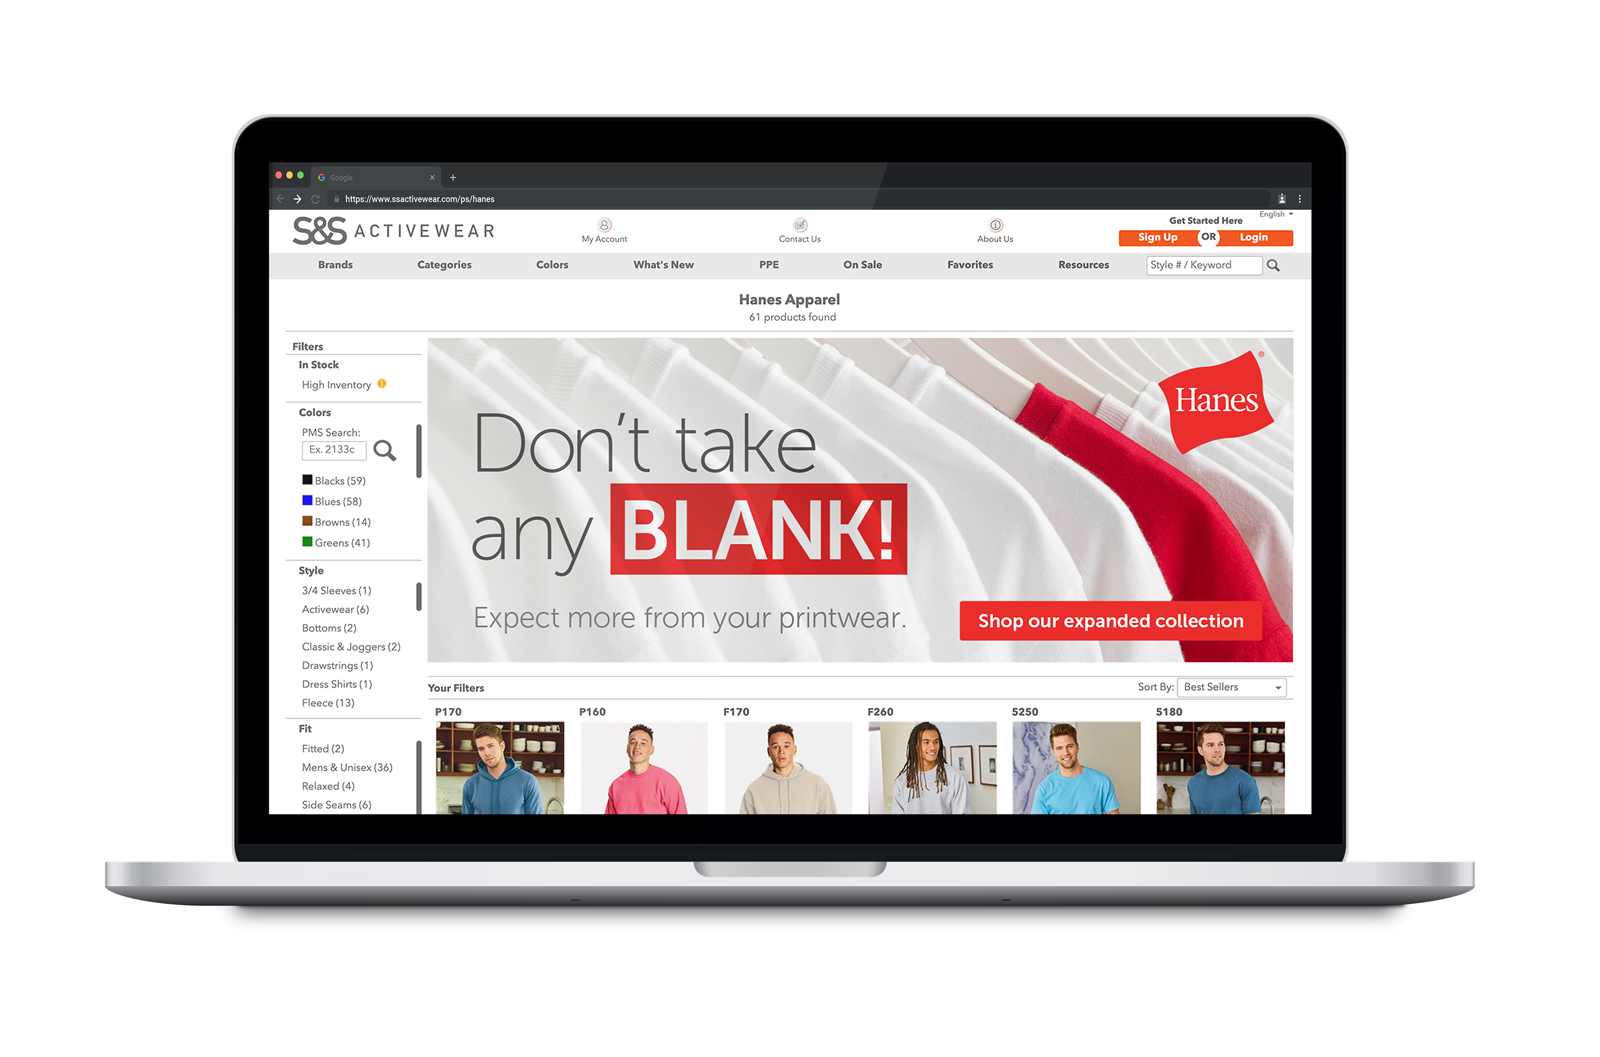 Hanes - Don’t take any blank campaign landing page